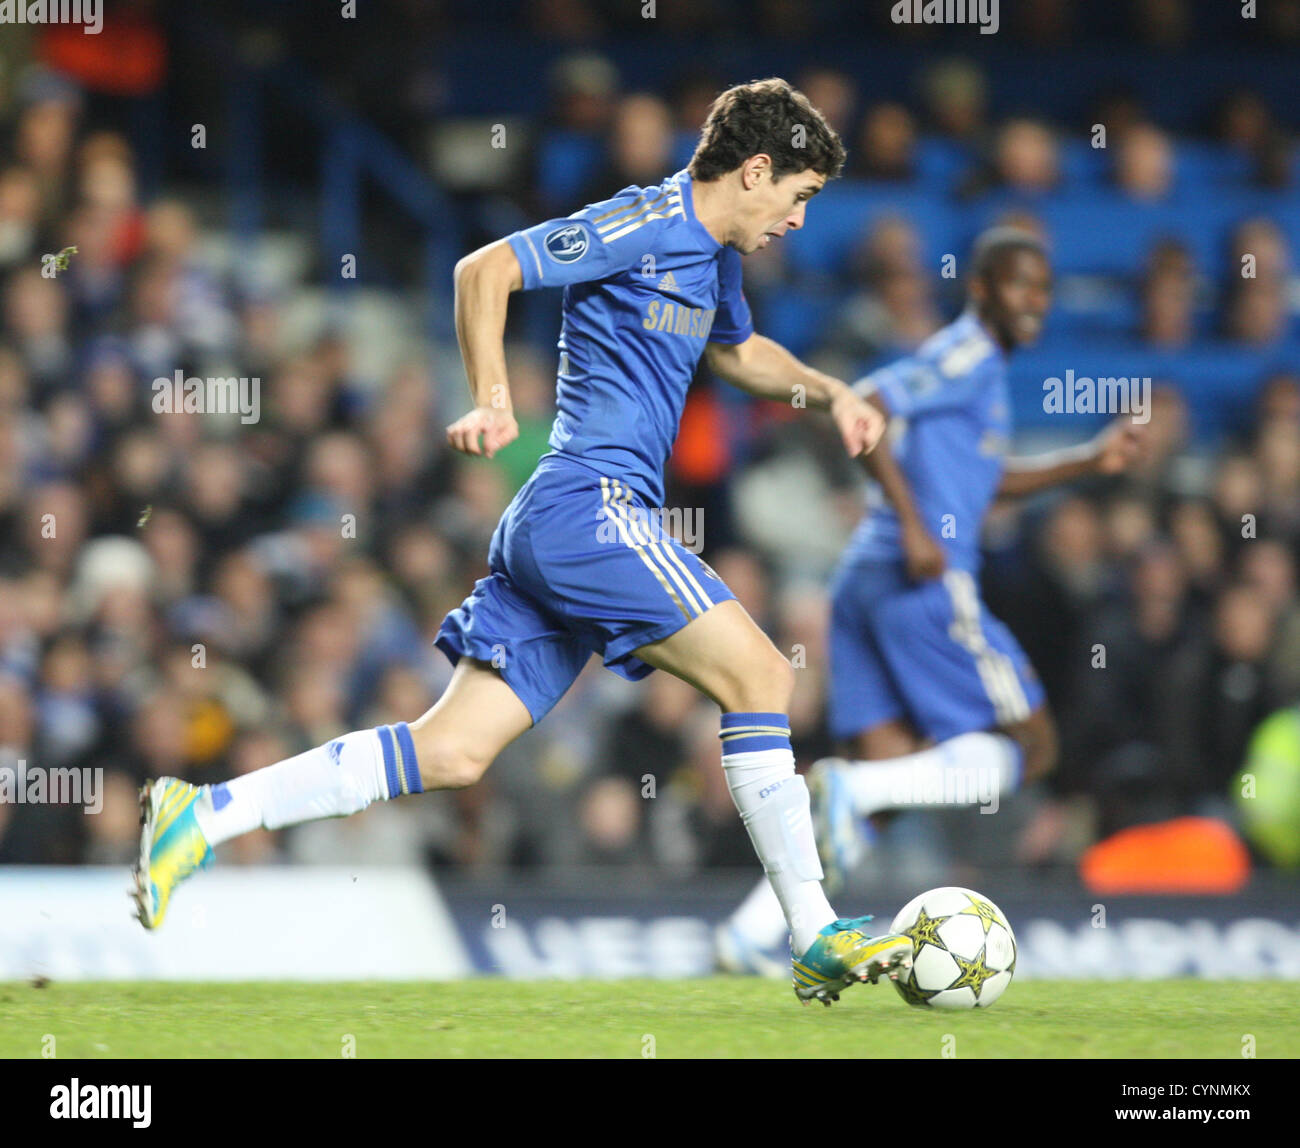 07.11.2012. London, England.  Oscar of Chelsea in action during the UEFA Champions League Group E game between Chelsea and Shakhtar Donetsk from Stamford Bridge Stock Photo